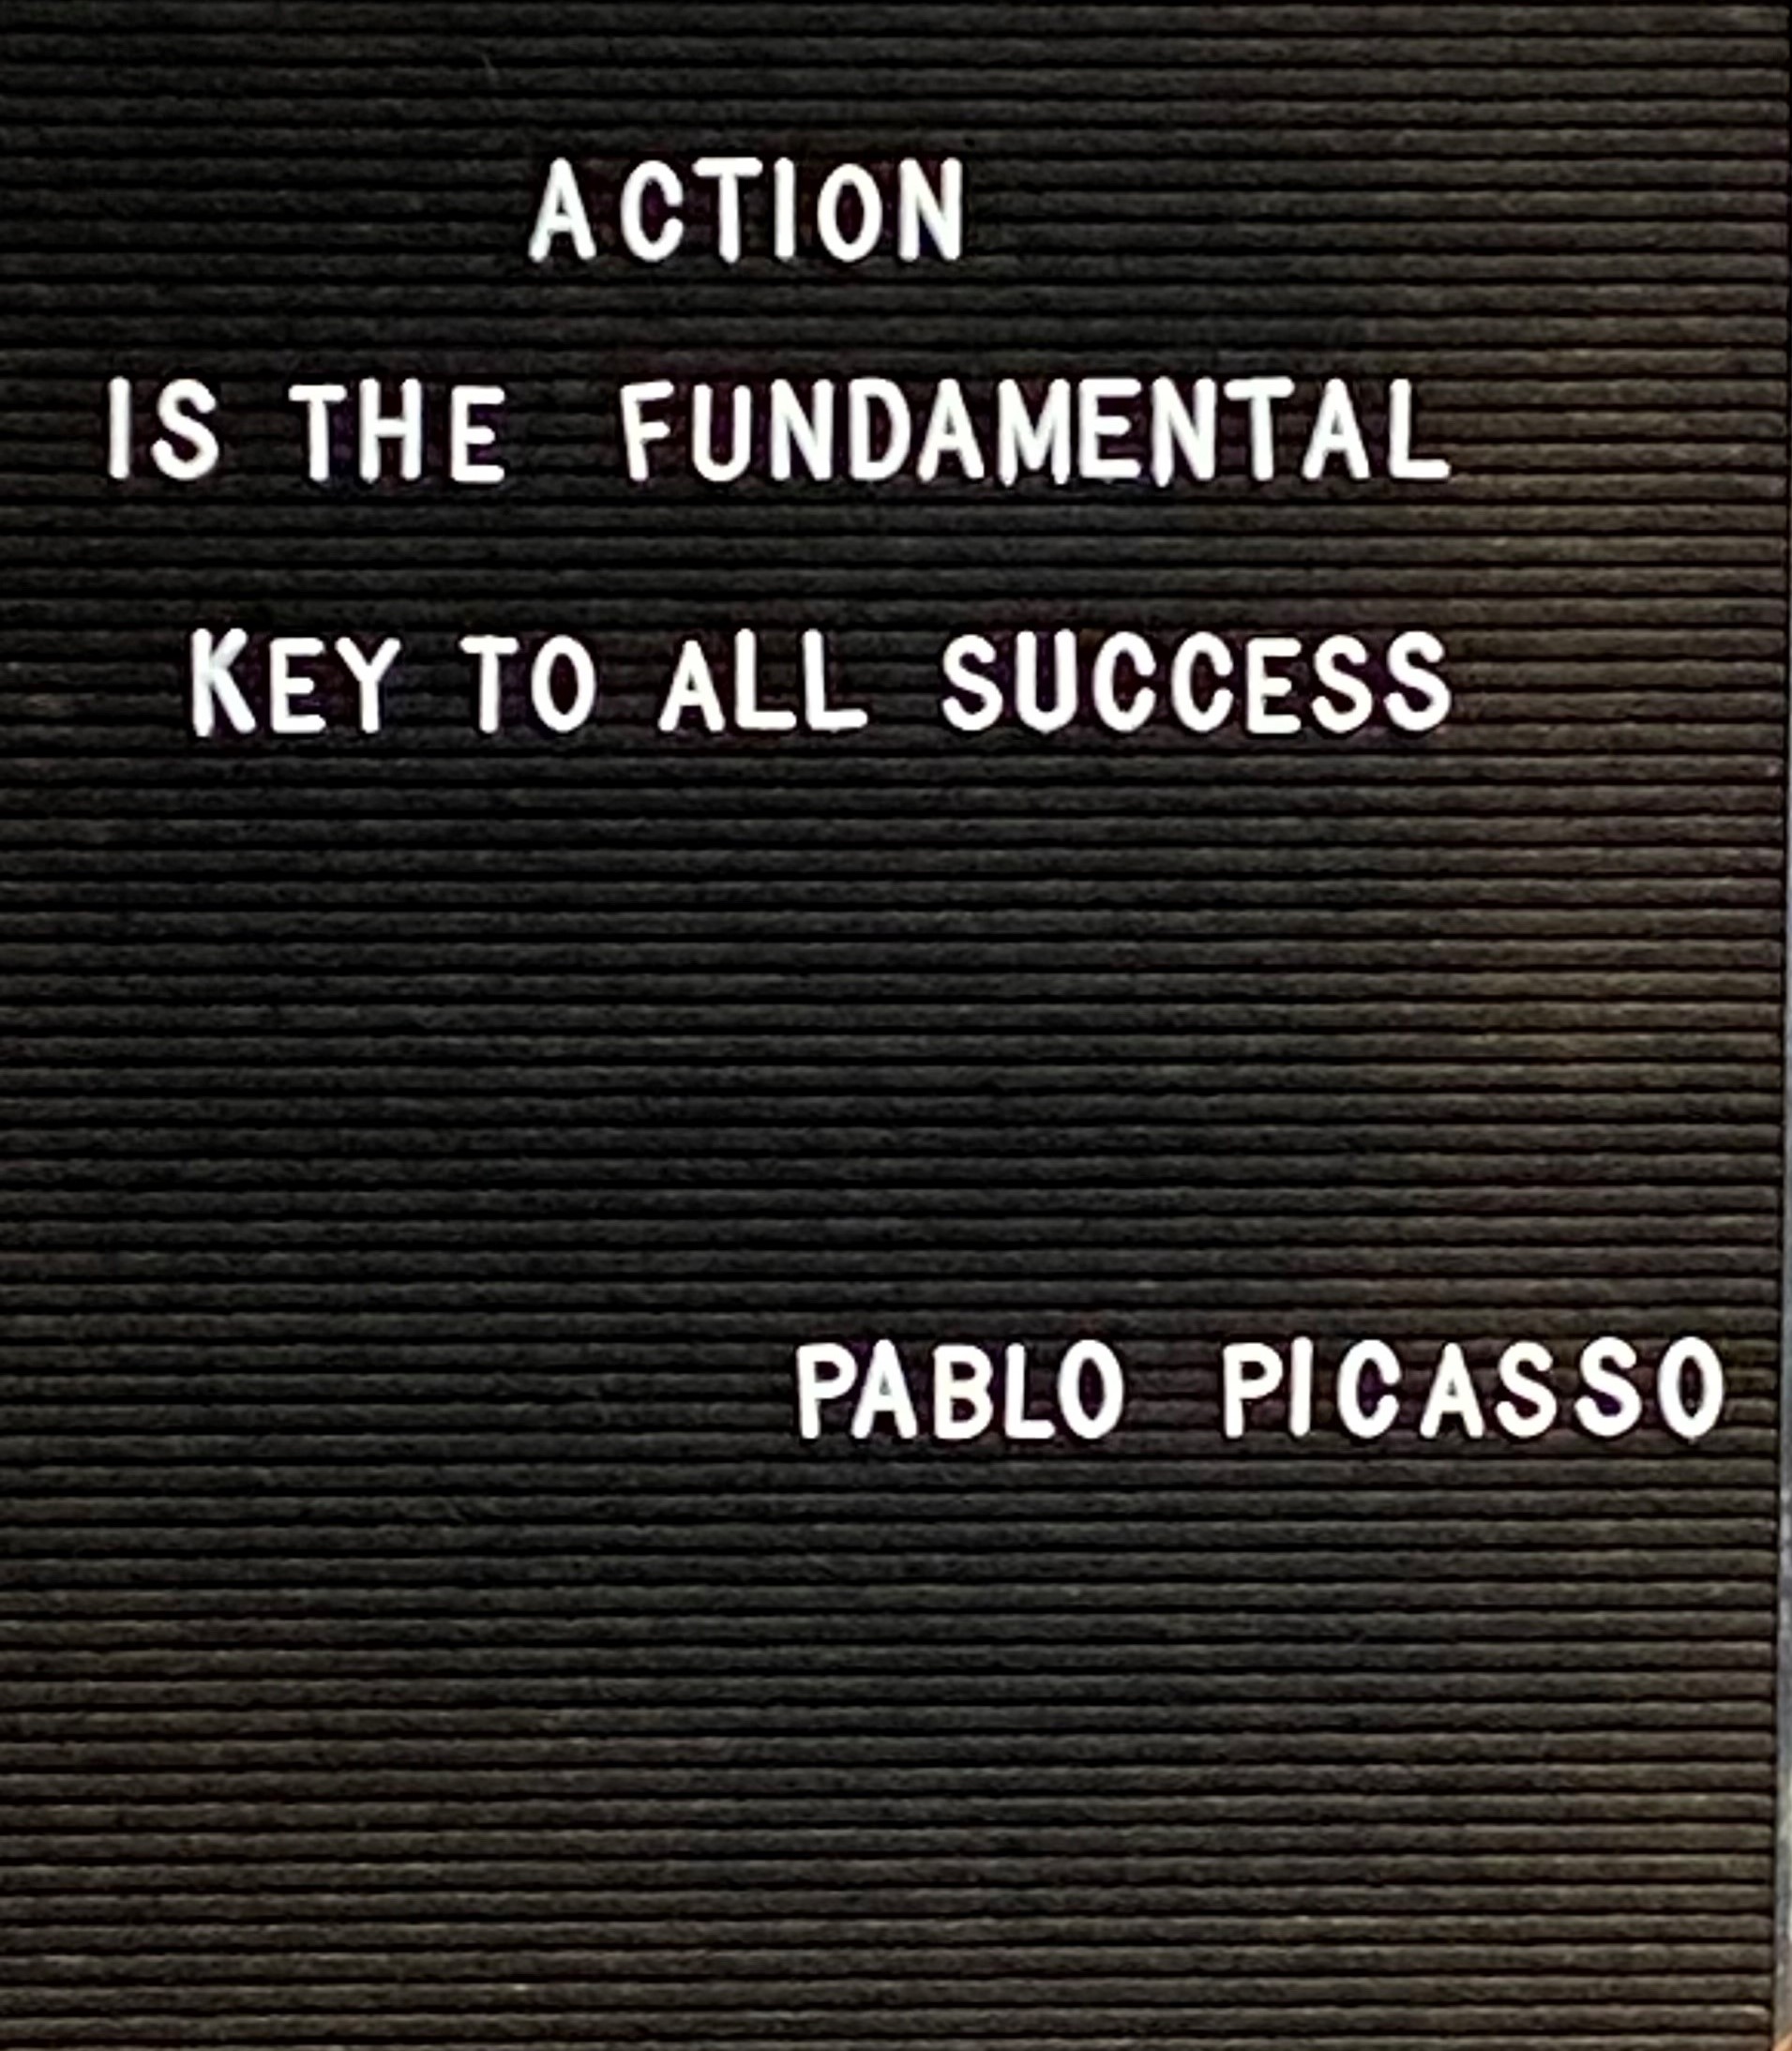 Motivational Quote by Pablo Picasso About Importance of Action